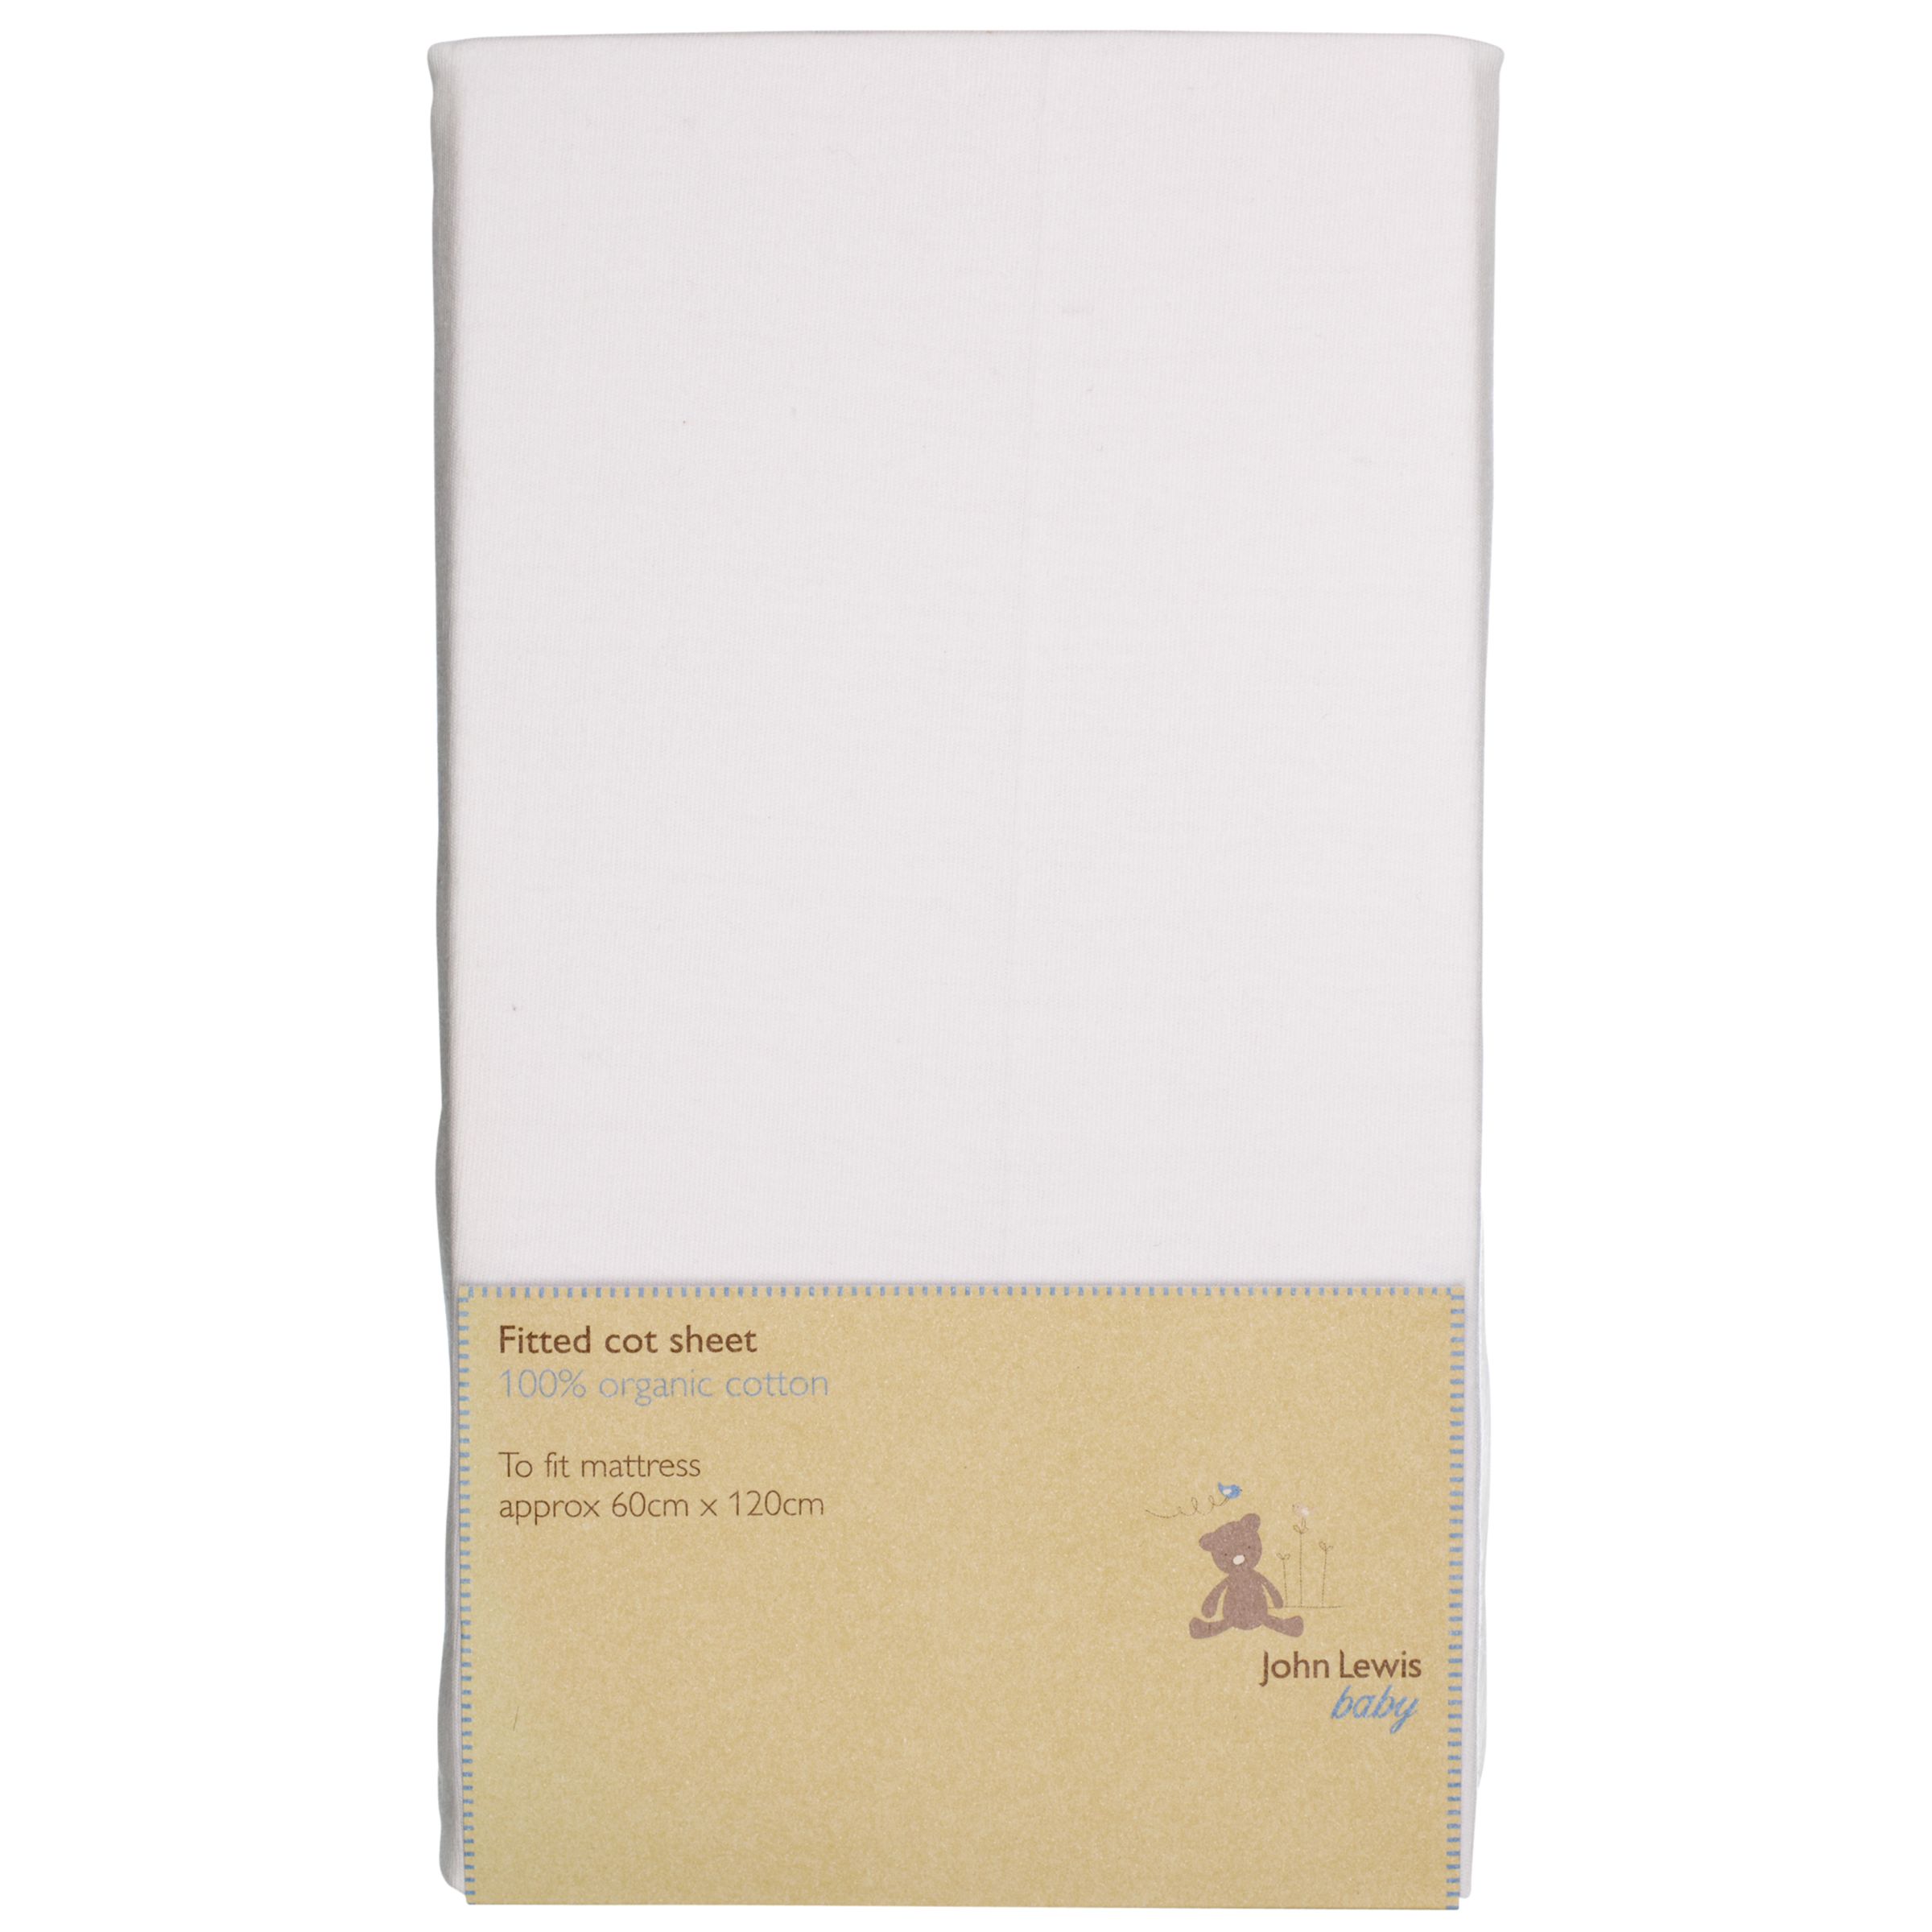 Fitted Organic Cotton Cot Sheet,